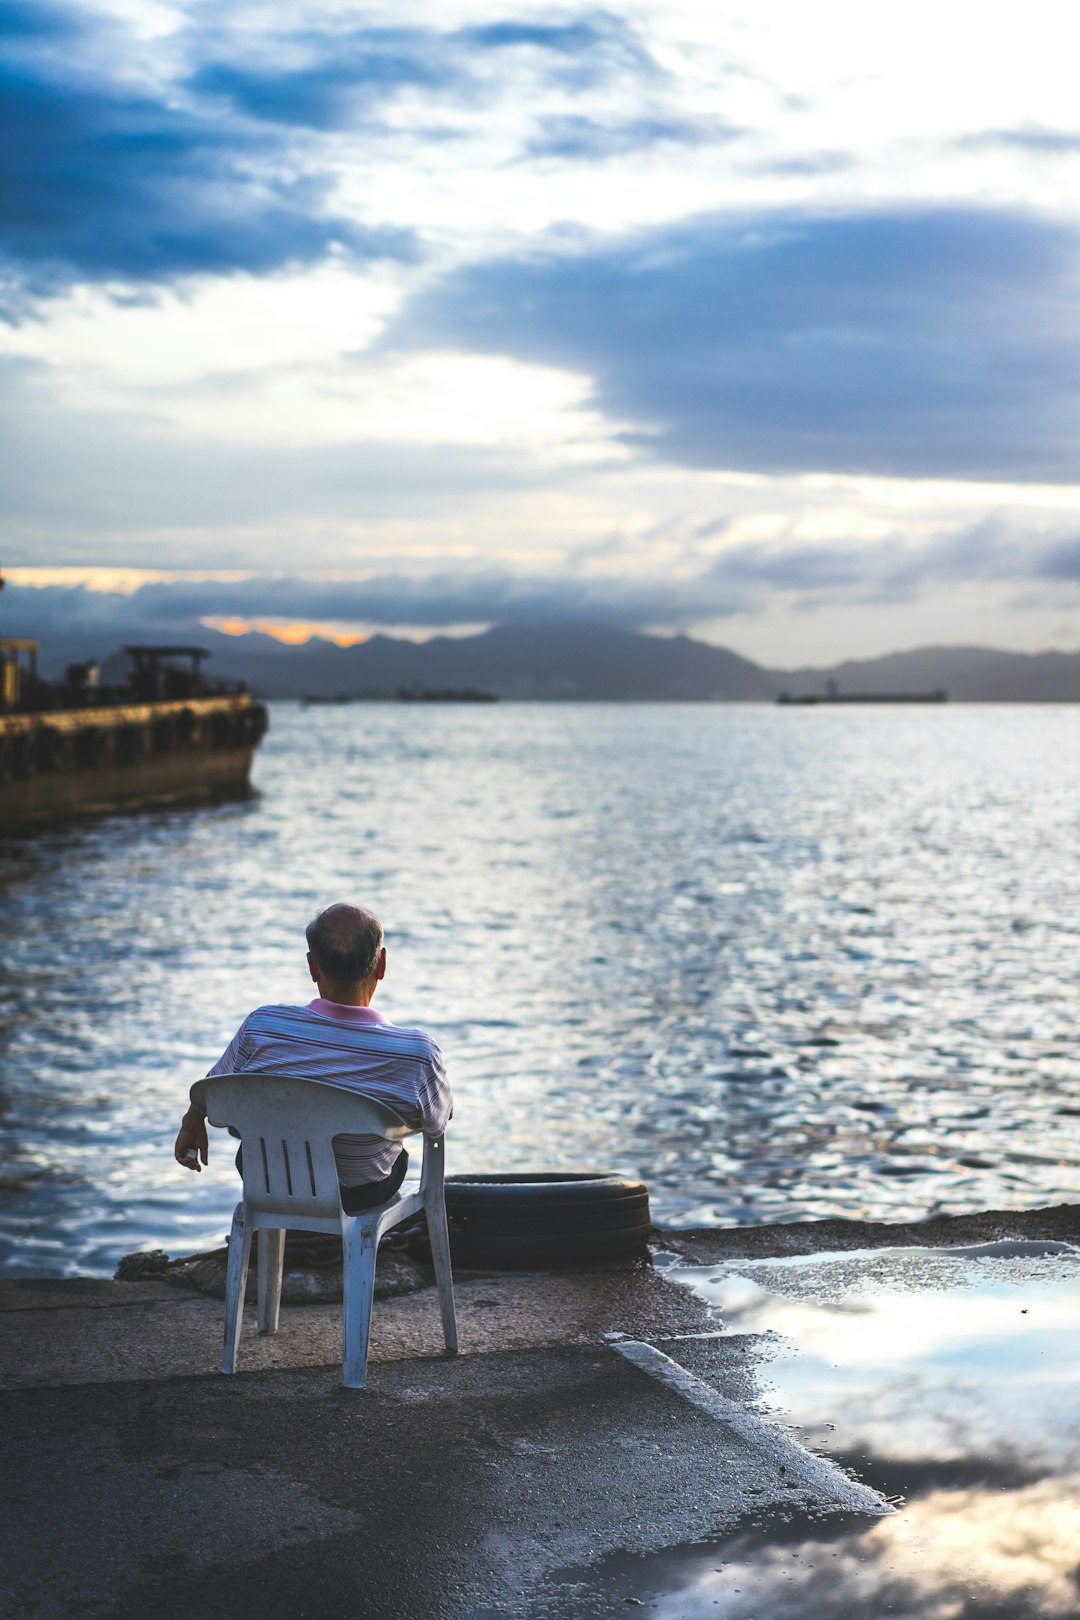 man in white shirt sitting on white plastic chair near body of water during daytime